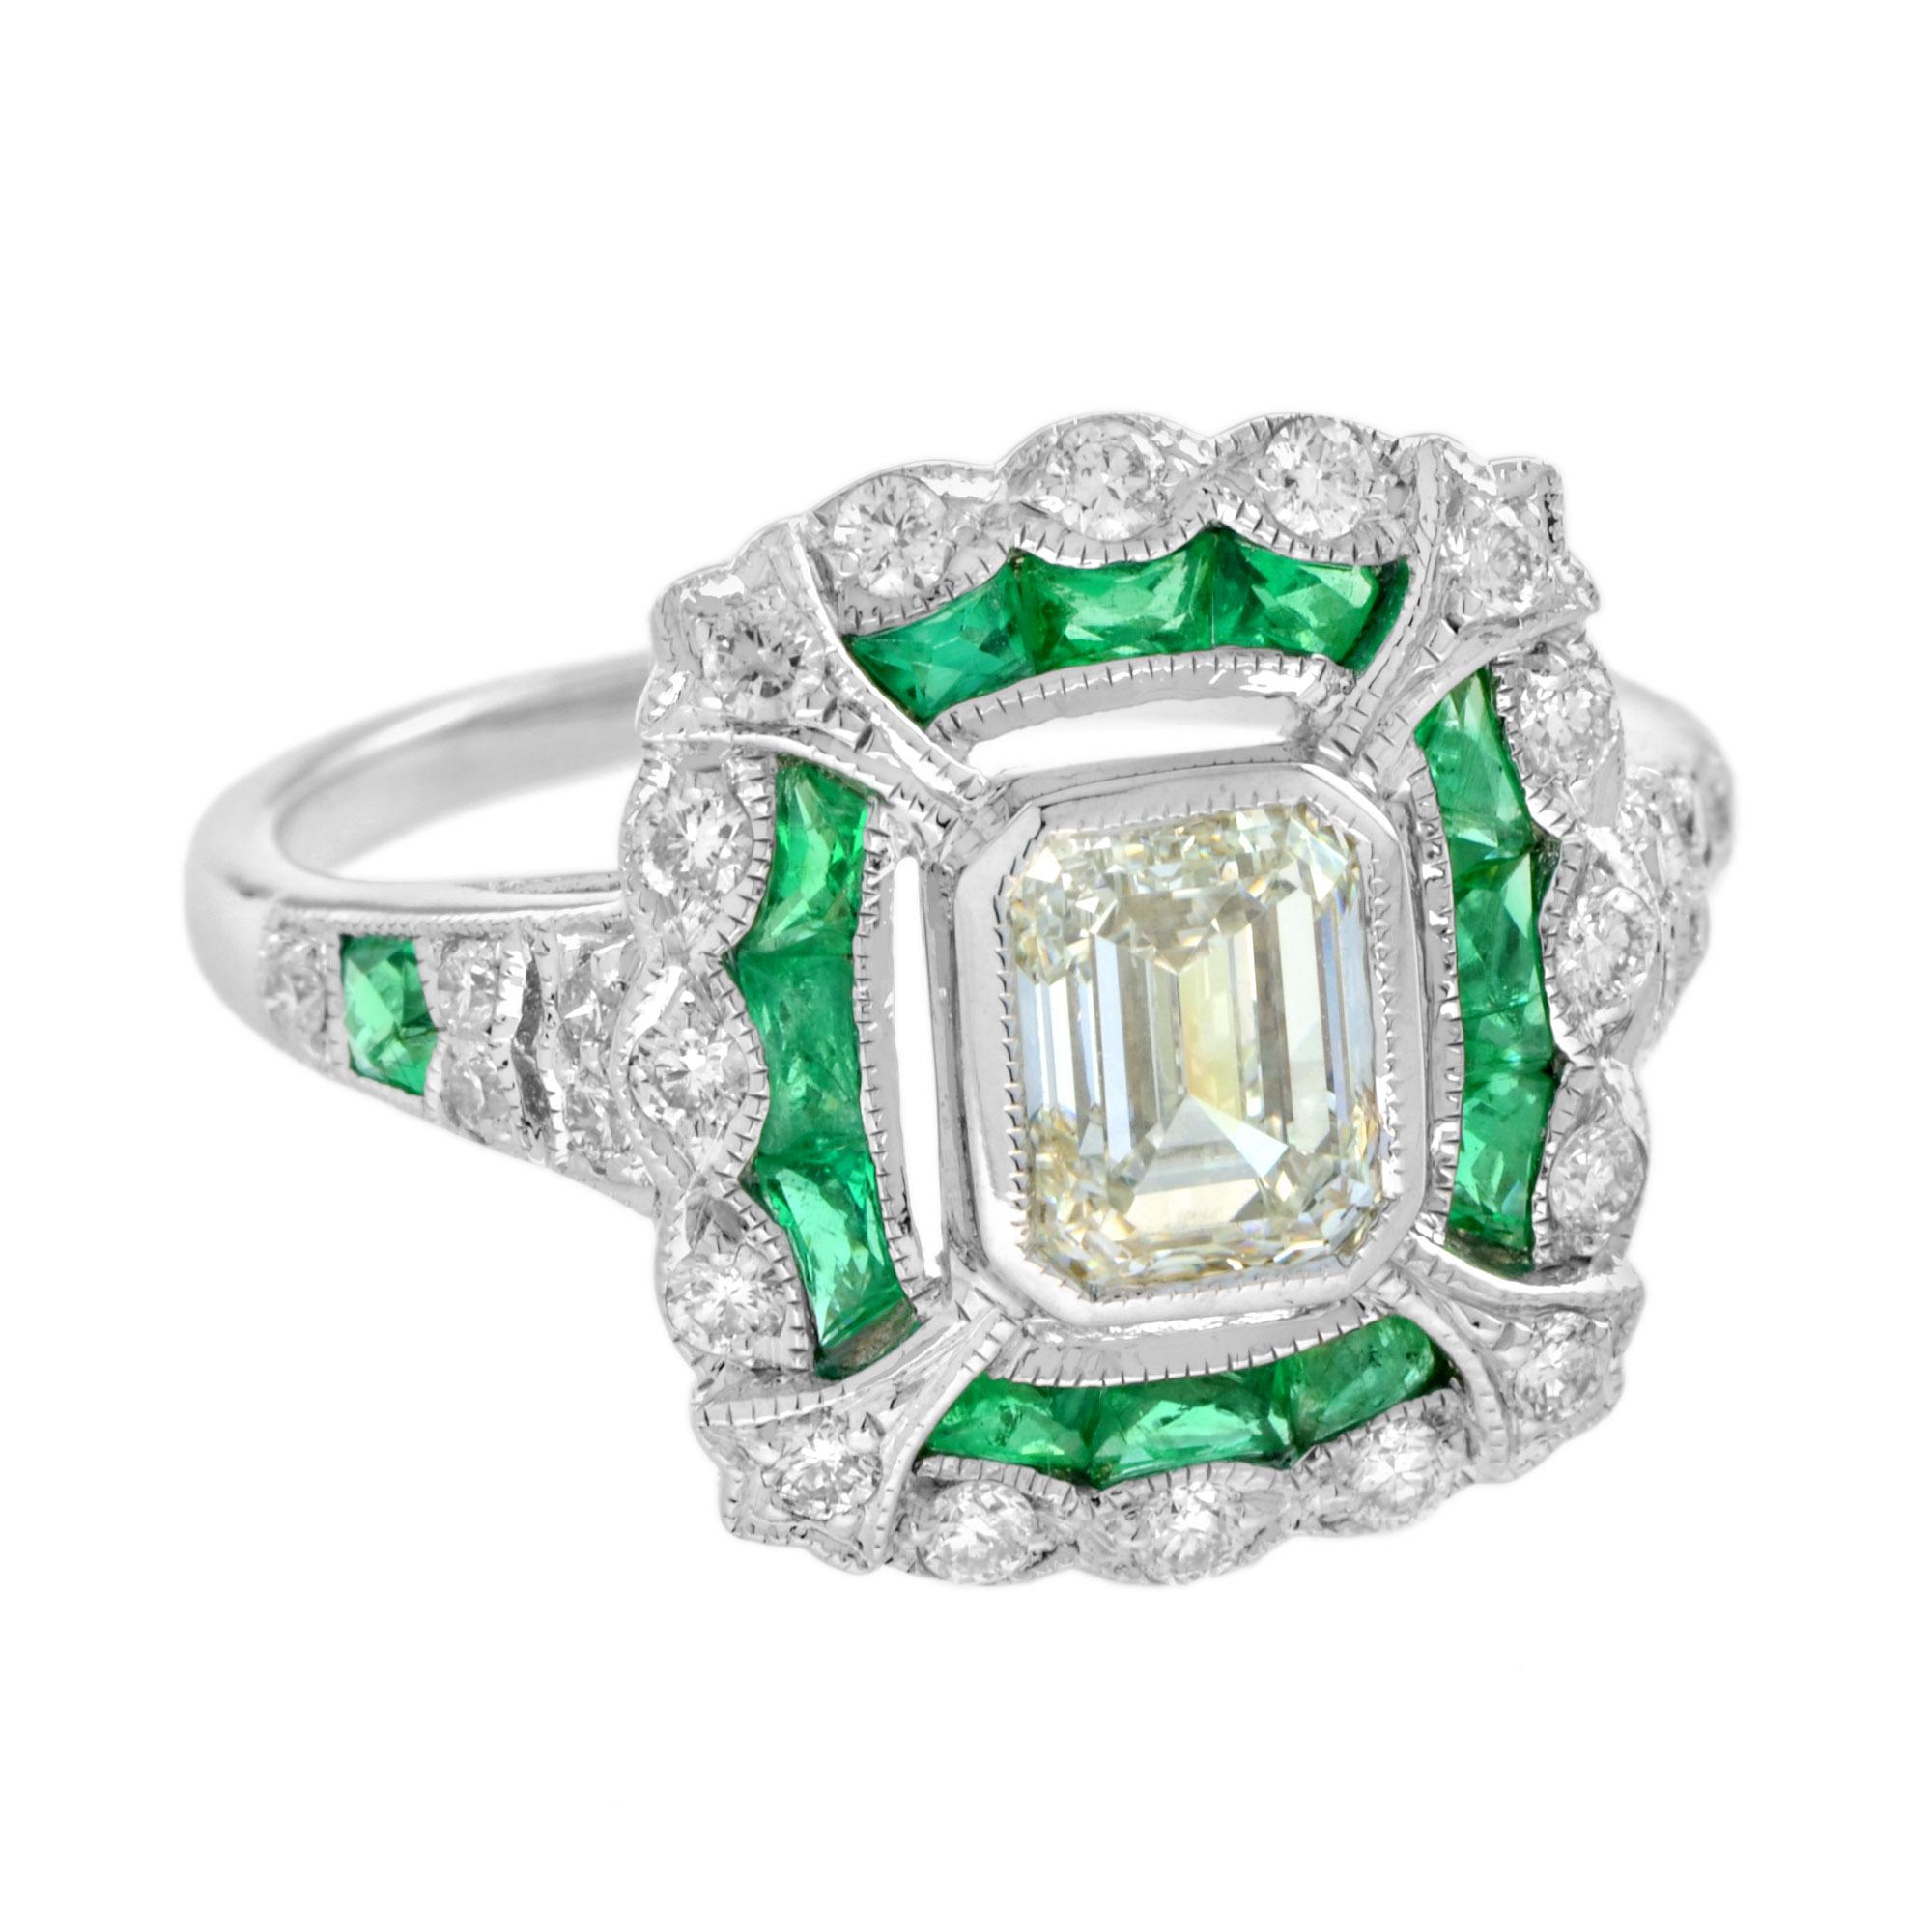 This Art Deco style ring features a bright and sparkly emerald cut L color VVS2 clarity diamond. Surrounding her are a row of French cut emerald and sparkly round diamonds, serving up plenty of color and diamond fire. 

Ring Information
Style: